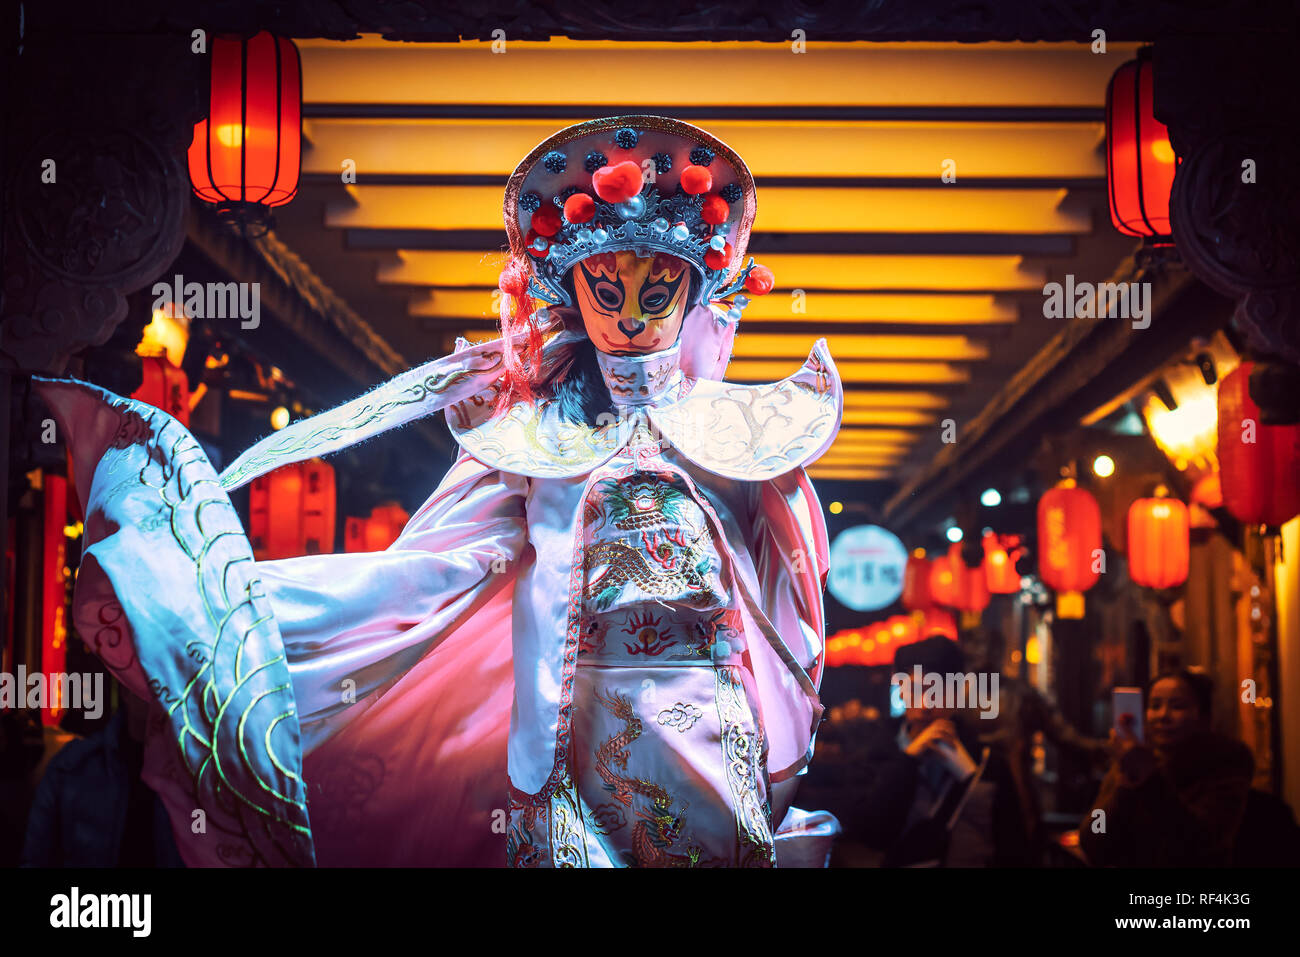 Chengdu, Sichuan Province, China - Jan 19, 2019: Chinese actress performs a public traditional face-changing art or bianlian onstage at Chunxifang Chu Stock Photo